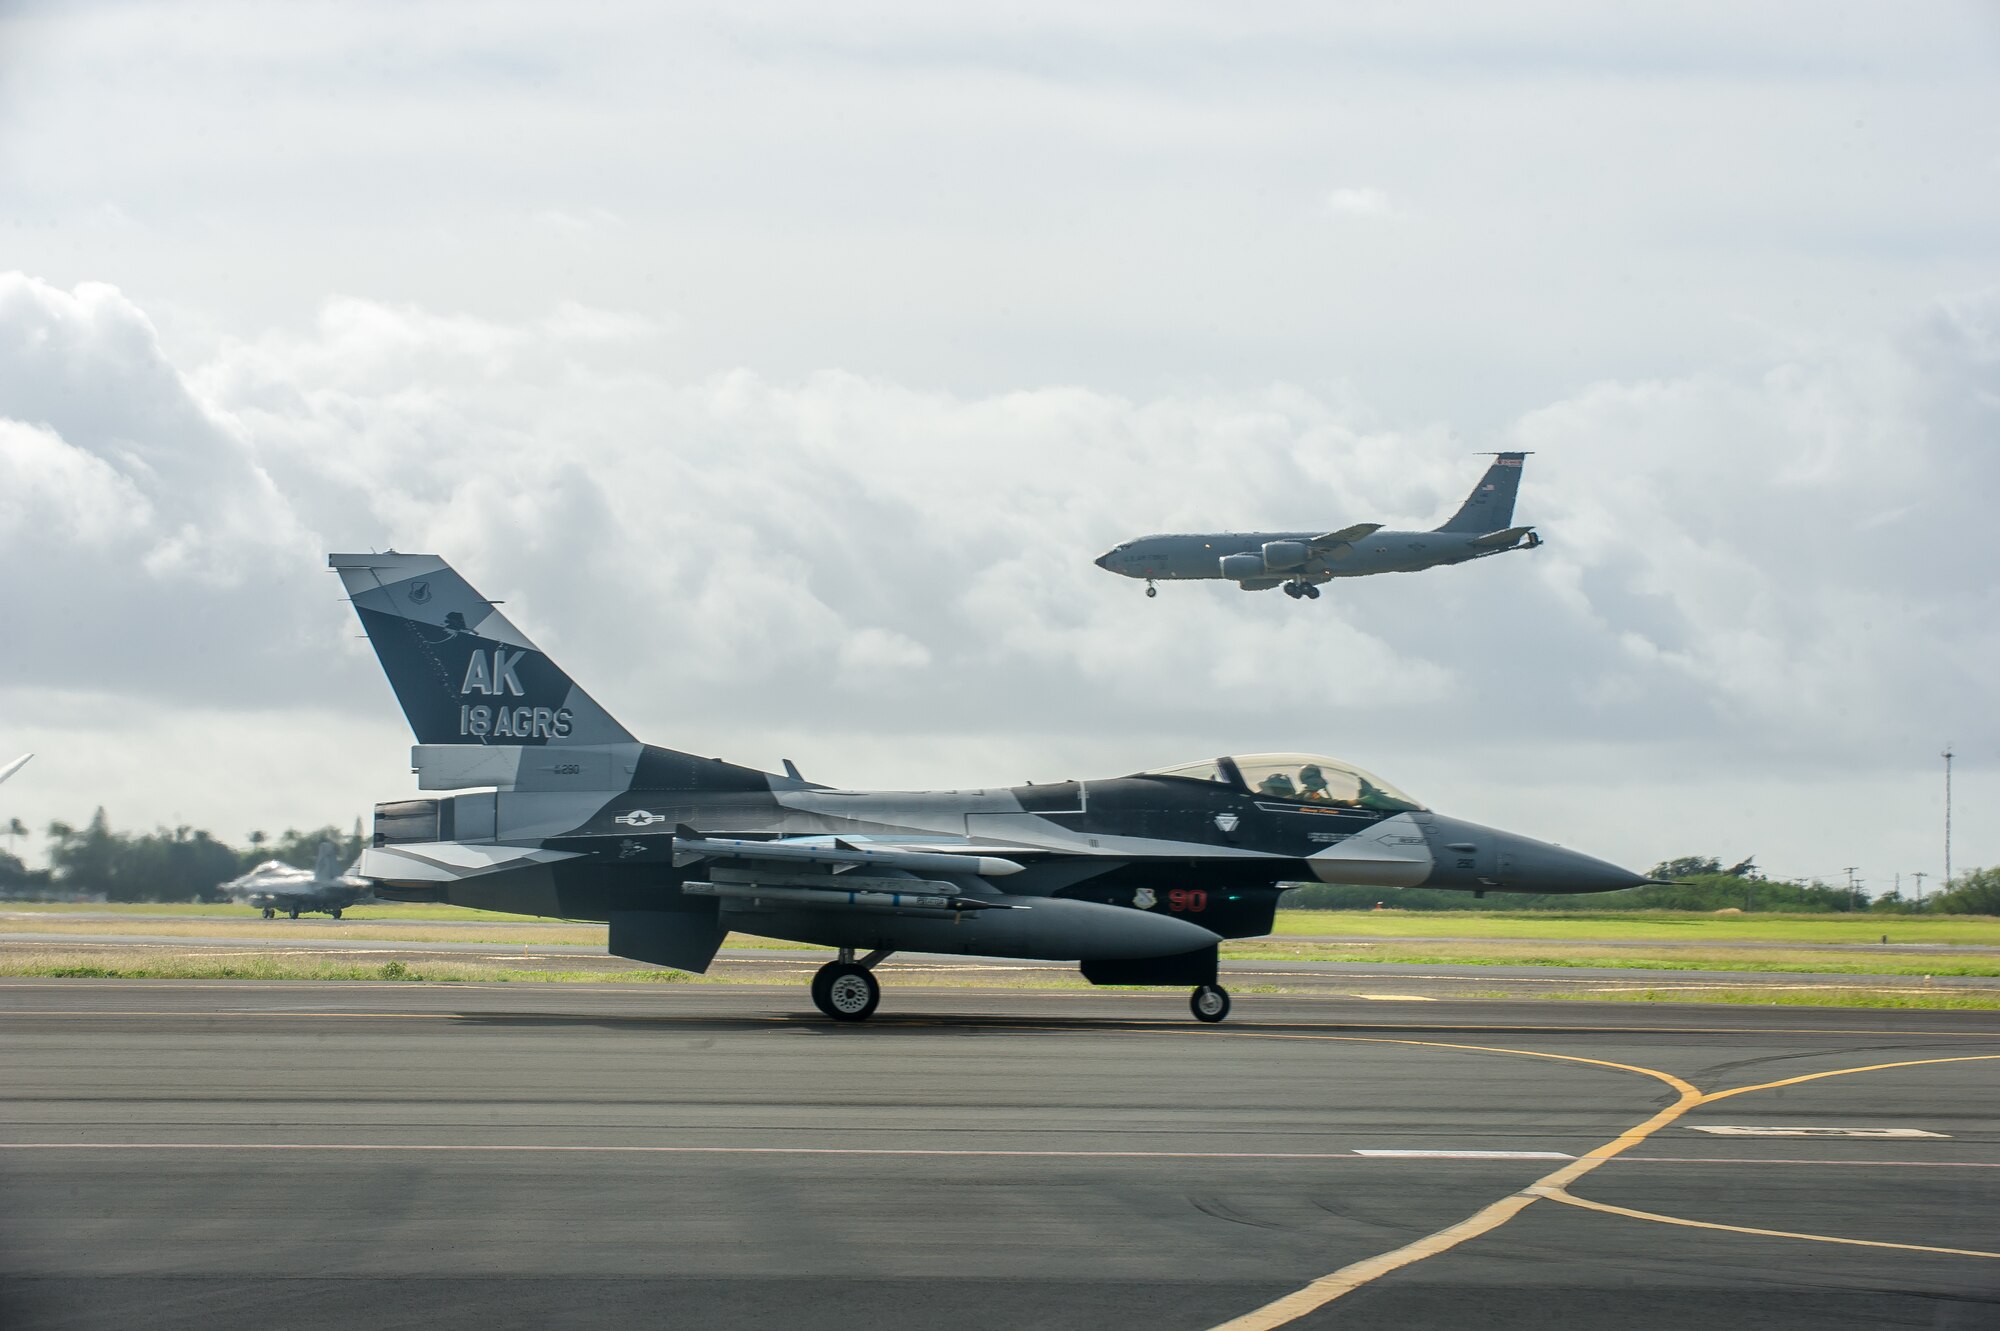 An F-16 Fighting Falcon, assigned to the 18th Aggressor Squadron, taxis down the flight line Jan. 17, 2020, at Joint Base Pearl Harbor-Hickam, Hawaii, during exercise Sentry Aloha 20-1. The Falcon, and other combat aircraft, received in-air refueling from KC-135 Stratotankers, from the 128th Air Refueling Wing, Wisconsin Air National Guard, throughout a series of dissimilar-air-combat-training missions. Sentry Aloha is a Hawaii Air National Guard-led exercise, which provides participants a multi-faceted, joint venue with supporting infrastructure and personnel. (U.S. Air National Guard photo by Senior Airman John Linzmeier)